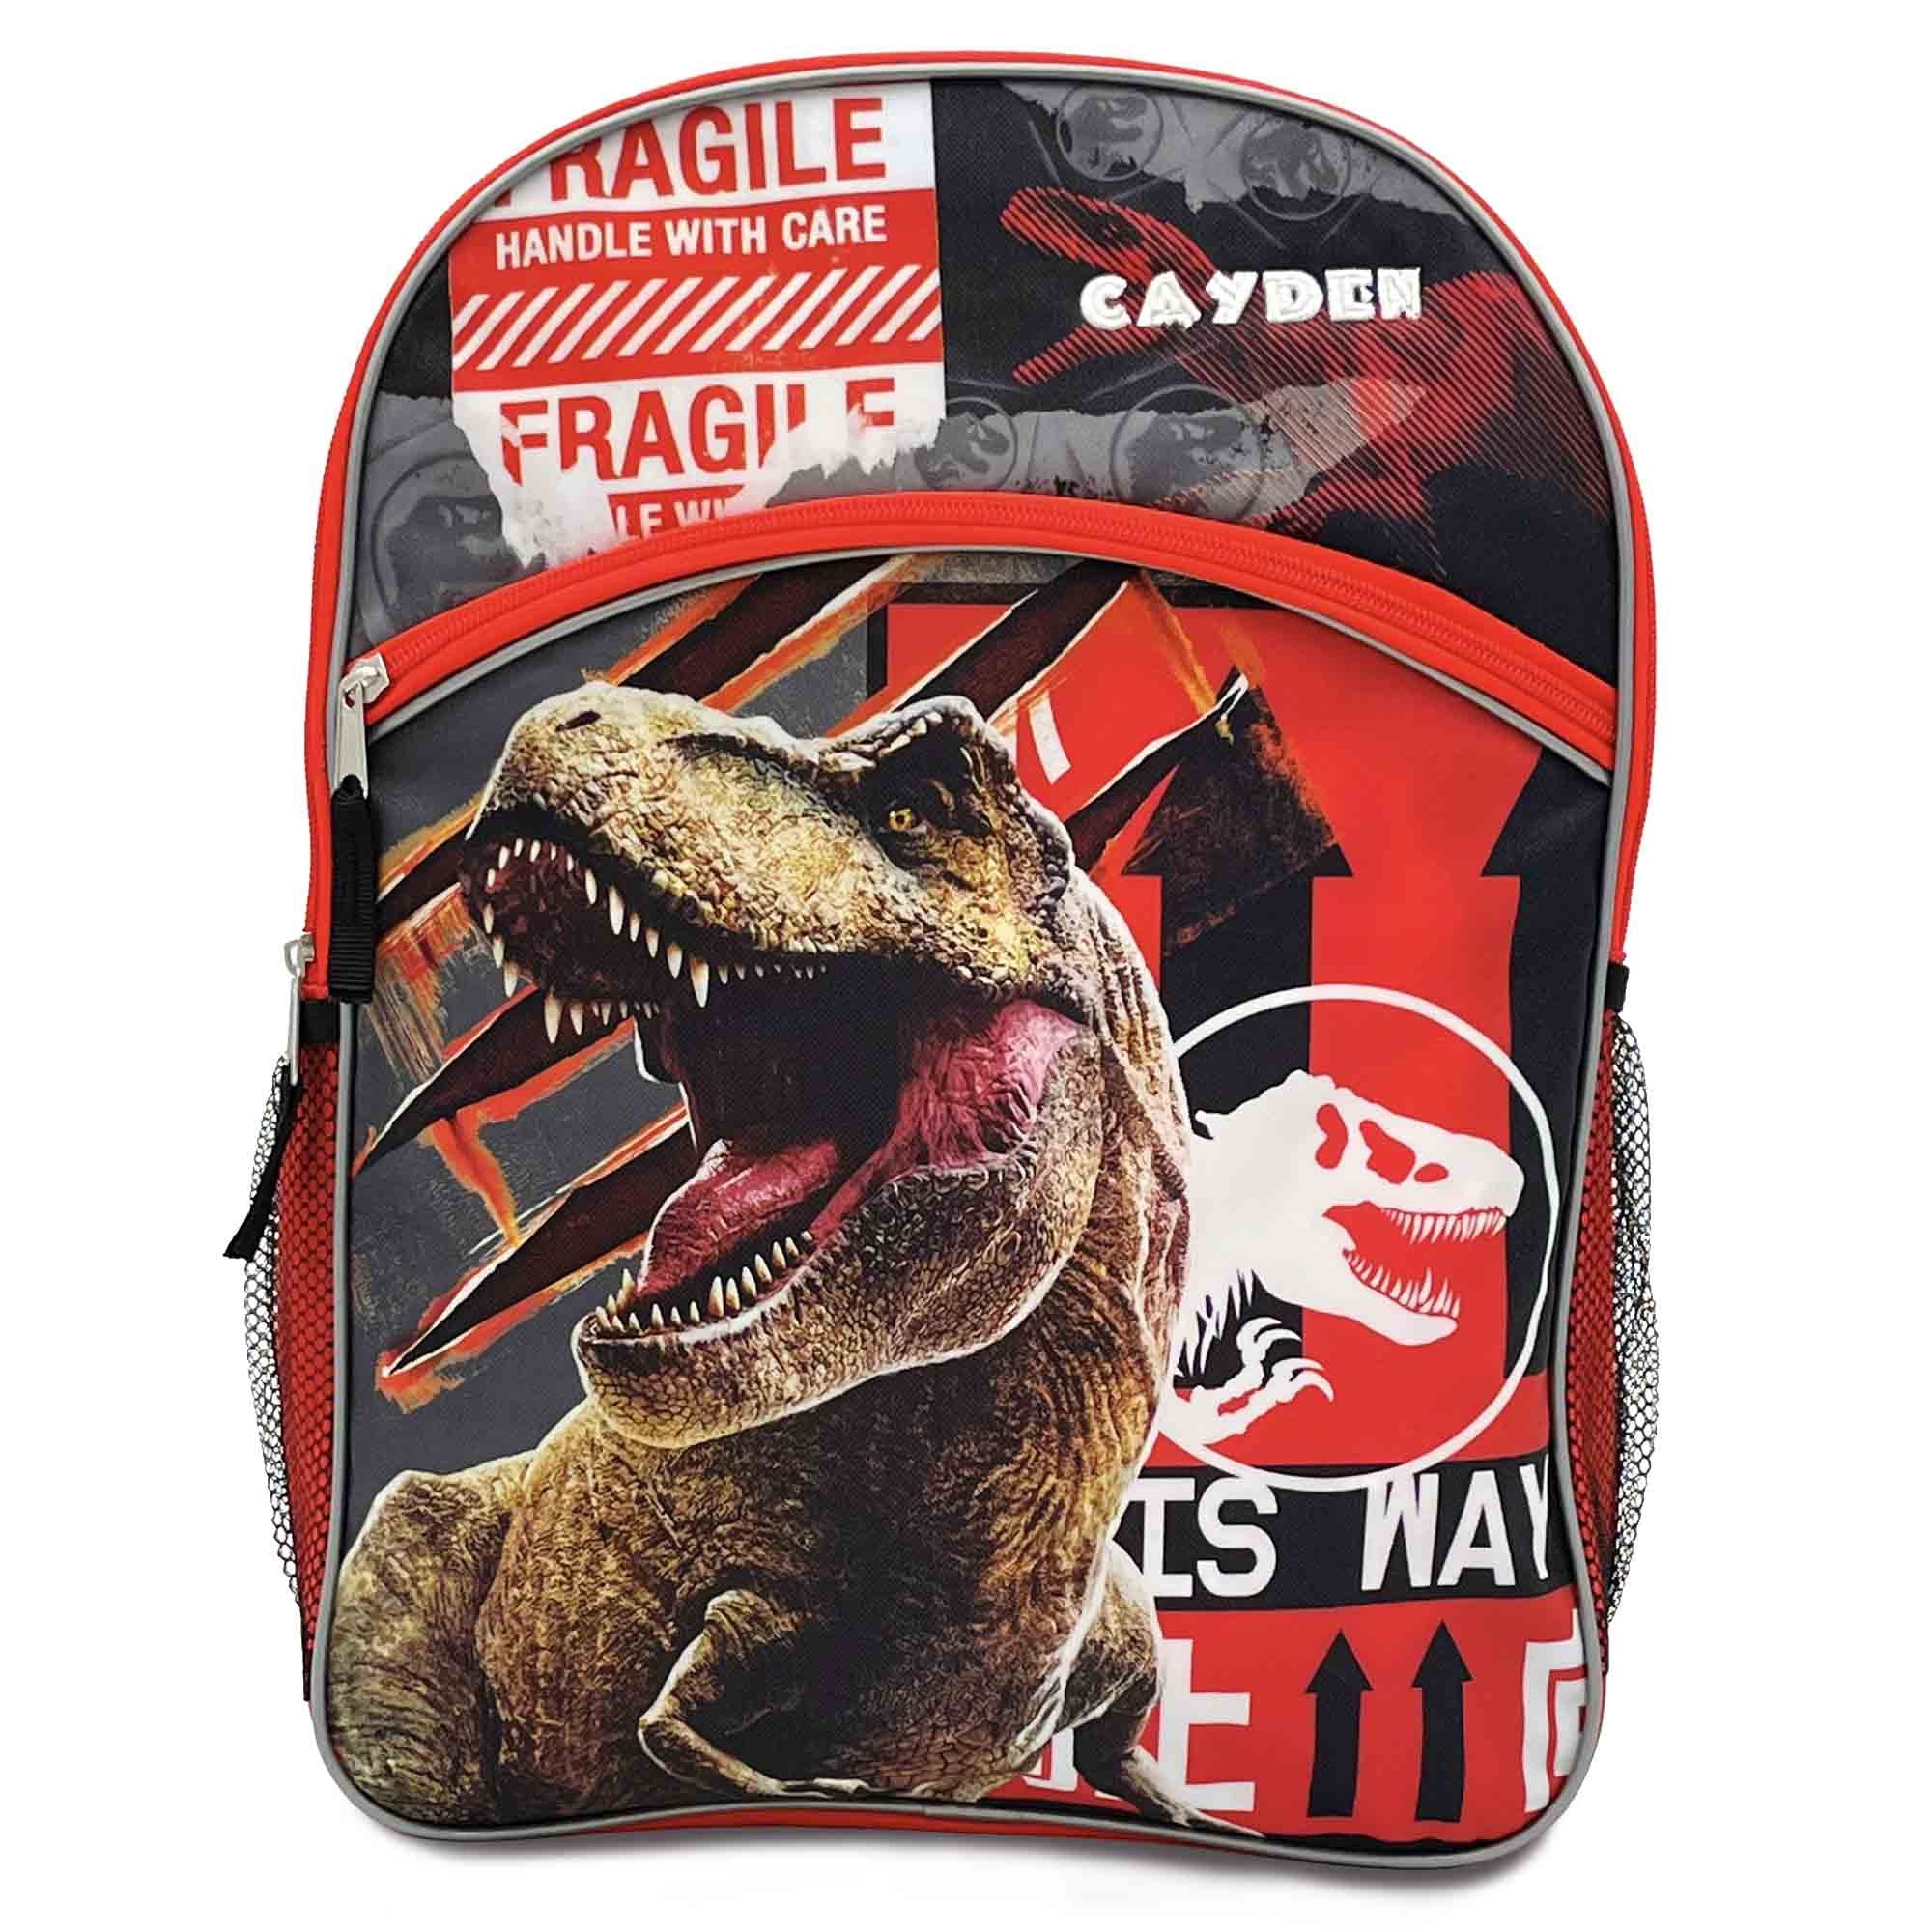 Personalized Dibsies Backpack created using Jurassic World Backpack - 16 Inch